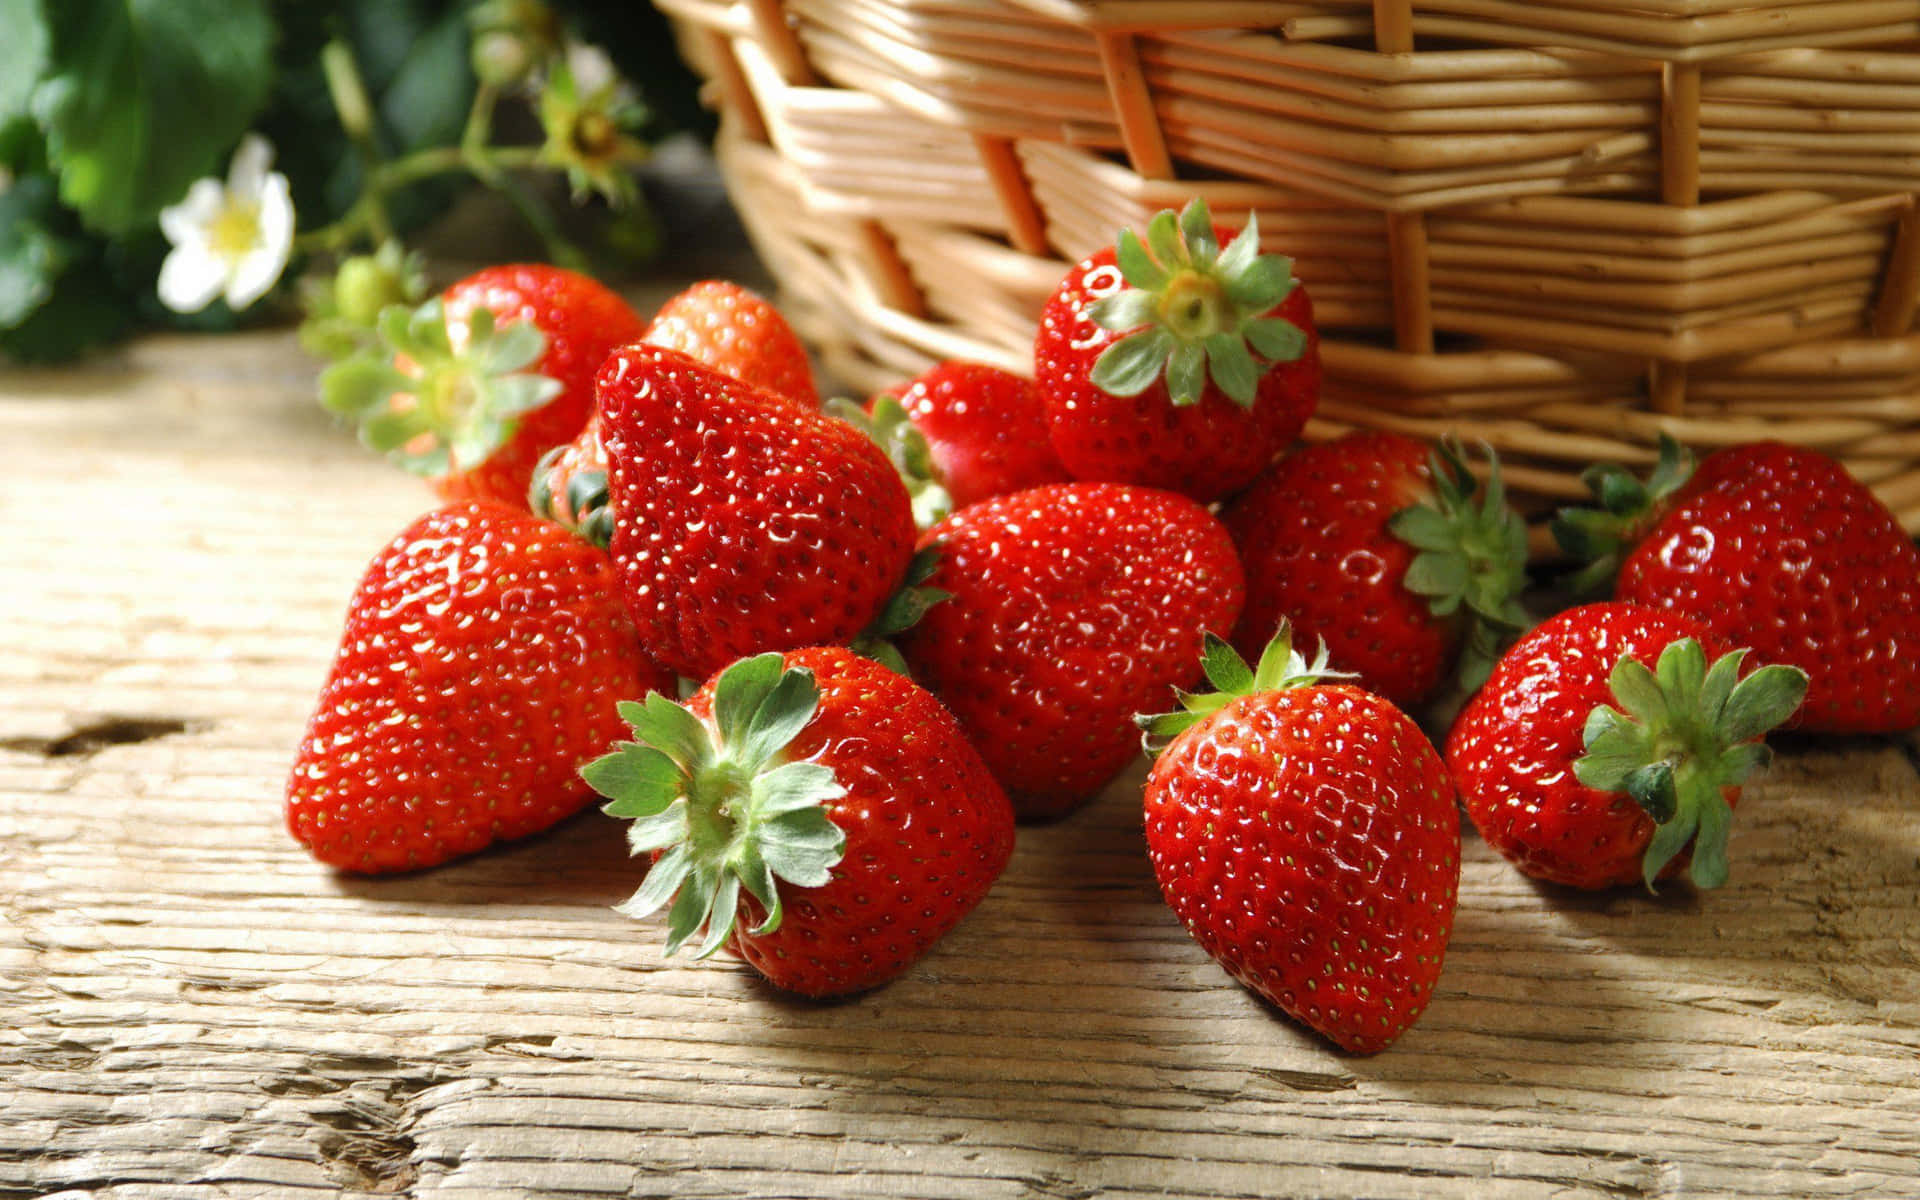 Delicious freshly picked strawberries